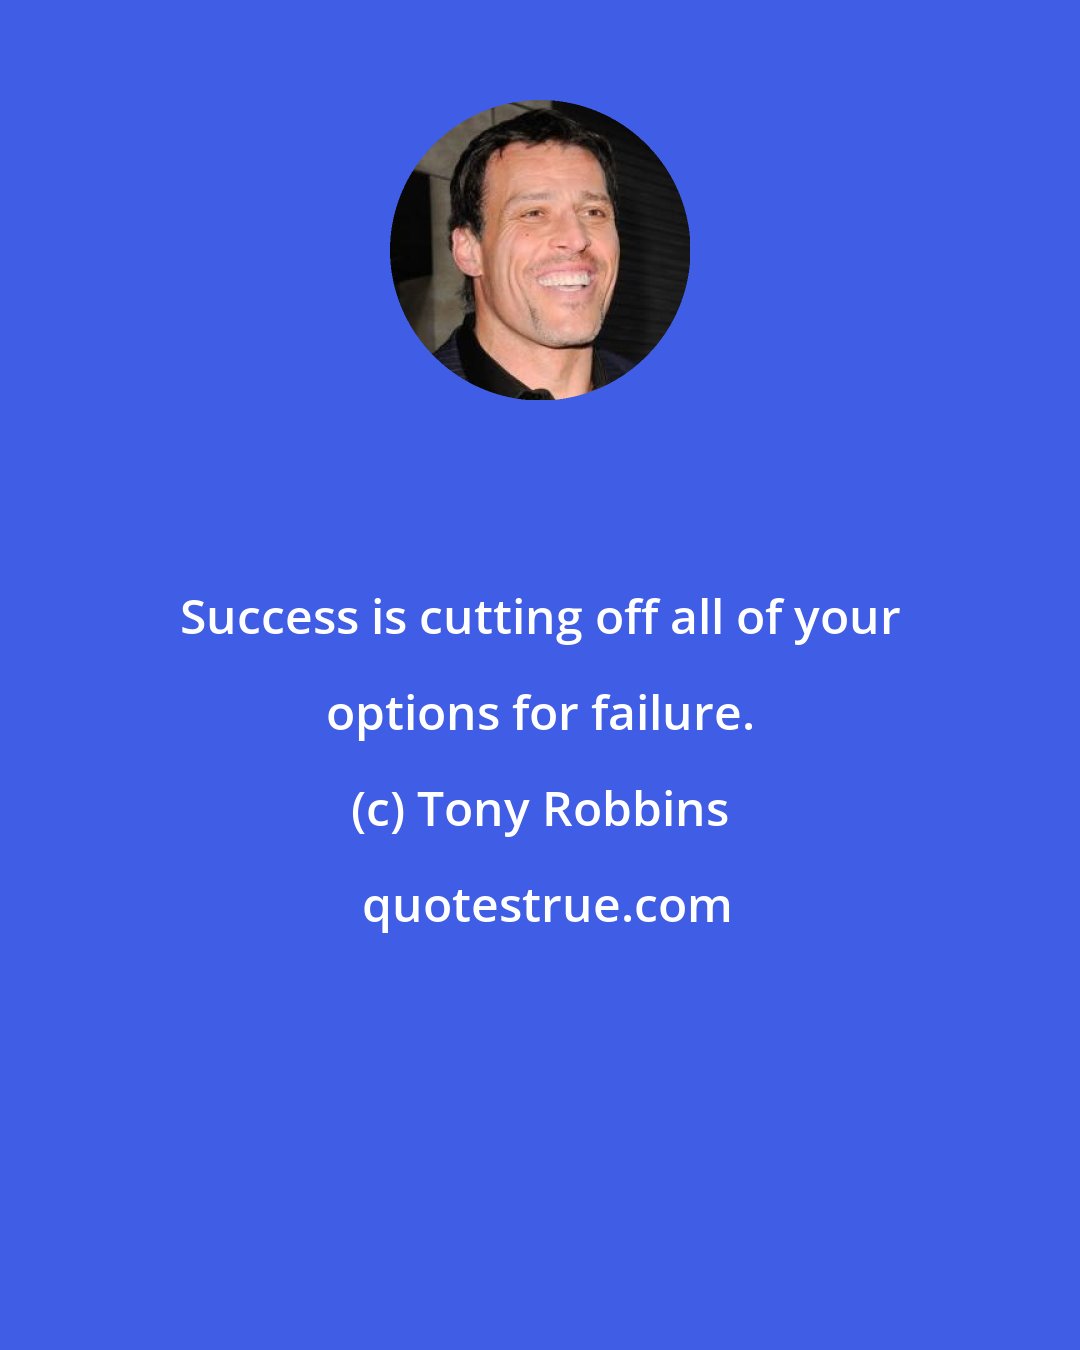 Tony Robbins: Success is cutting off all of your options for failure.